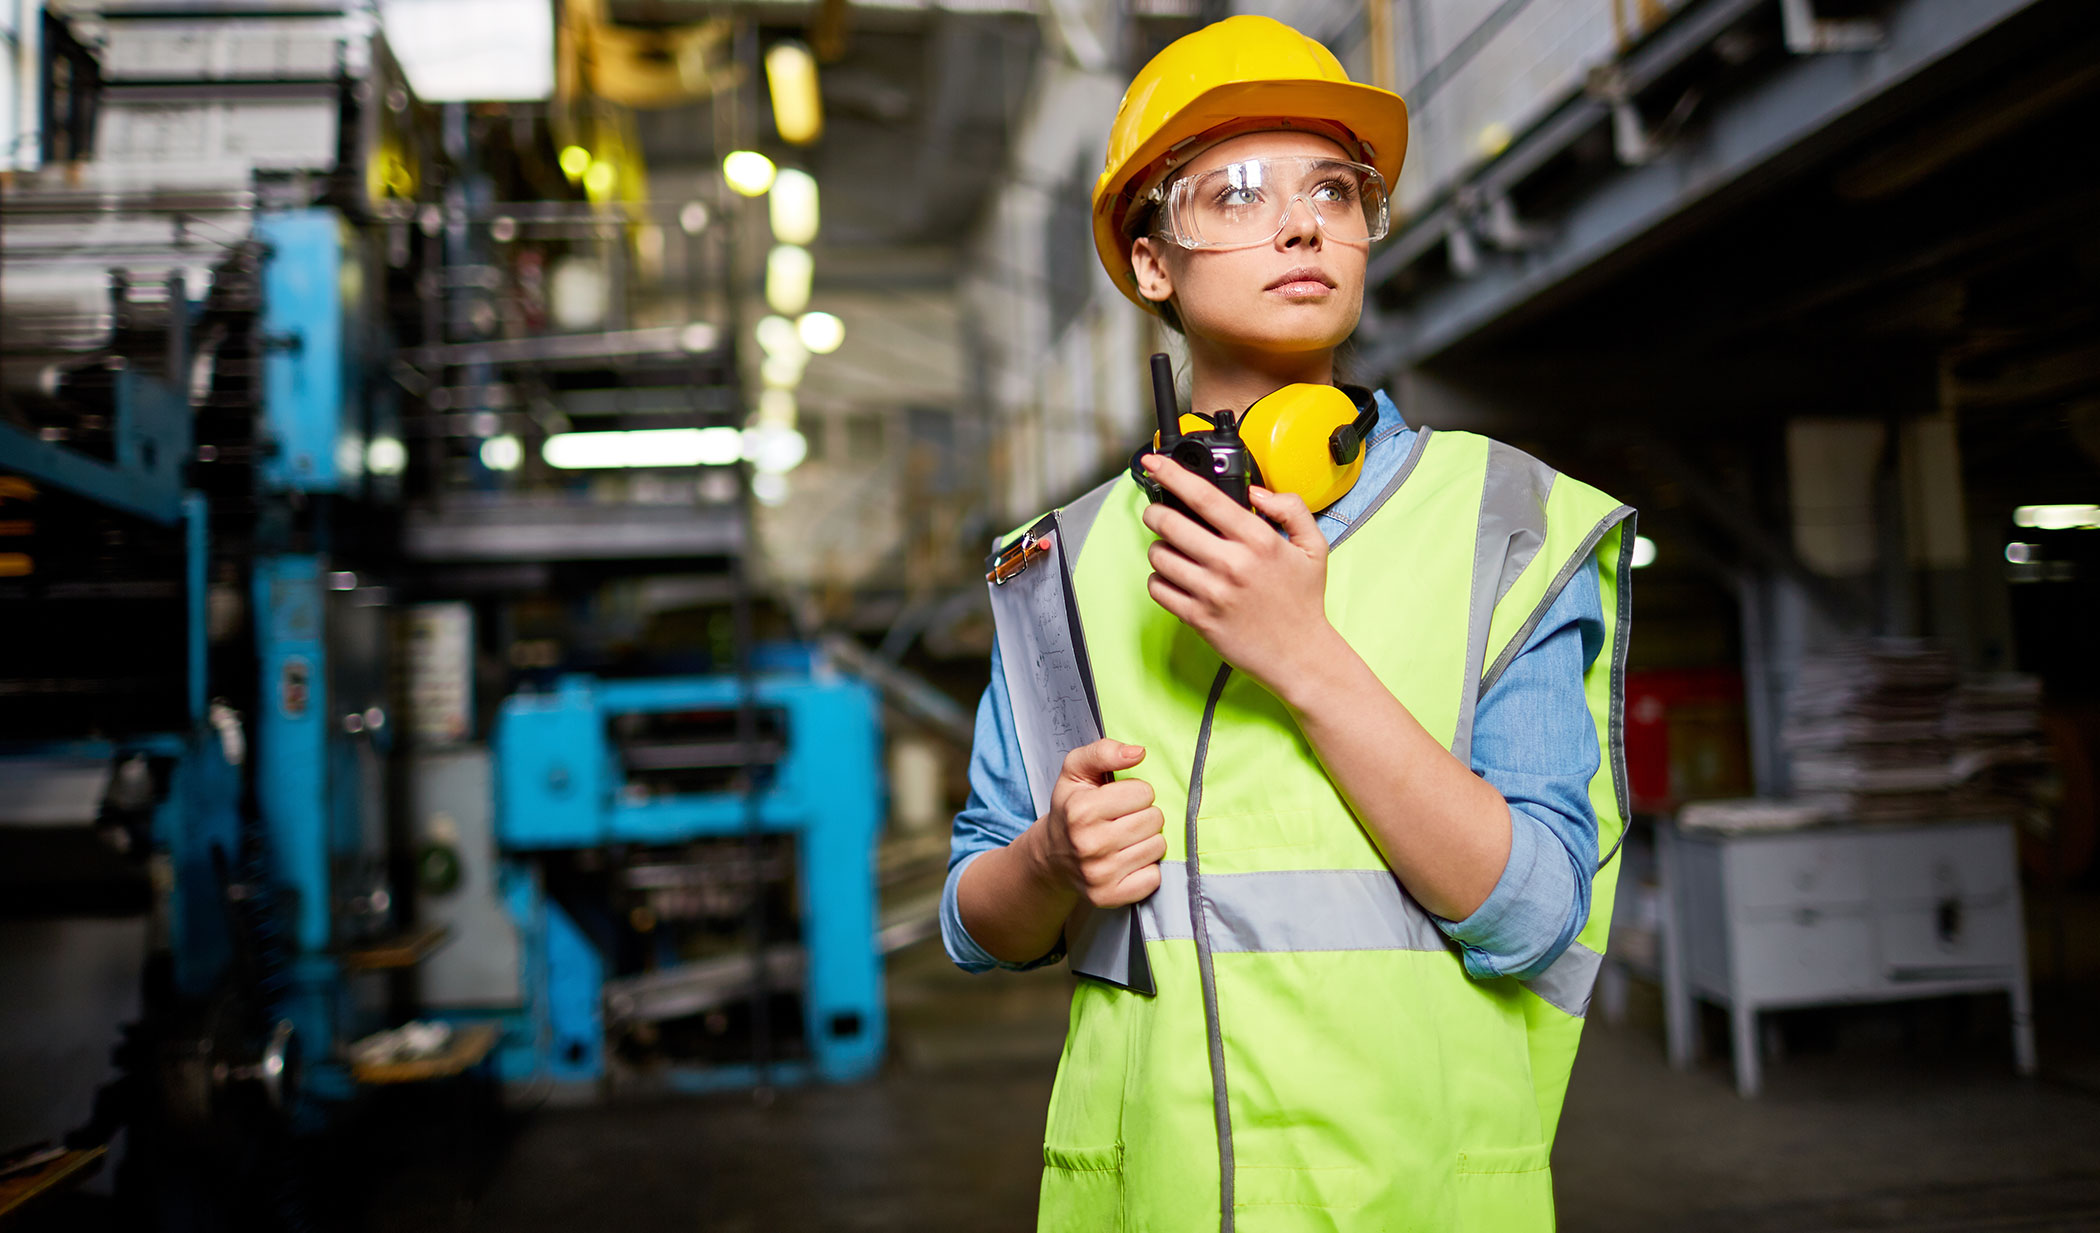 4 Common Food Industry Workplace Safety Mistakes